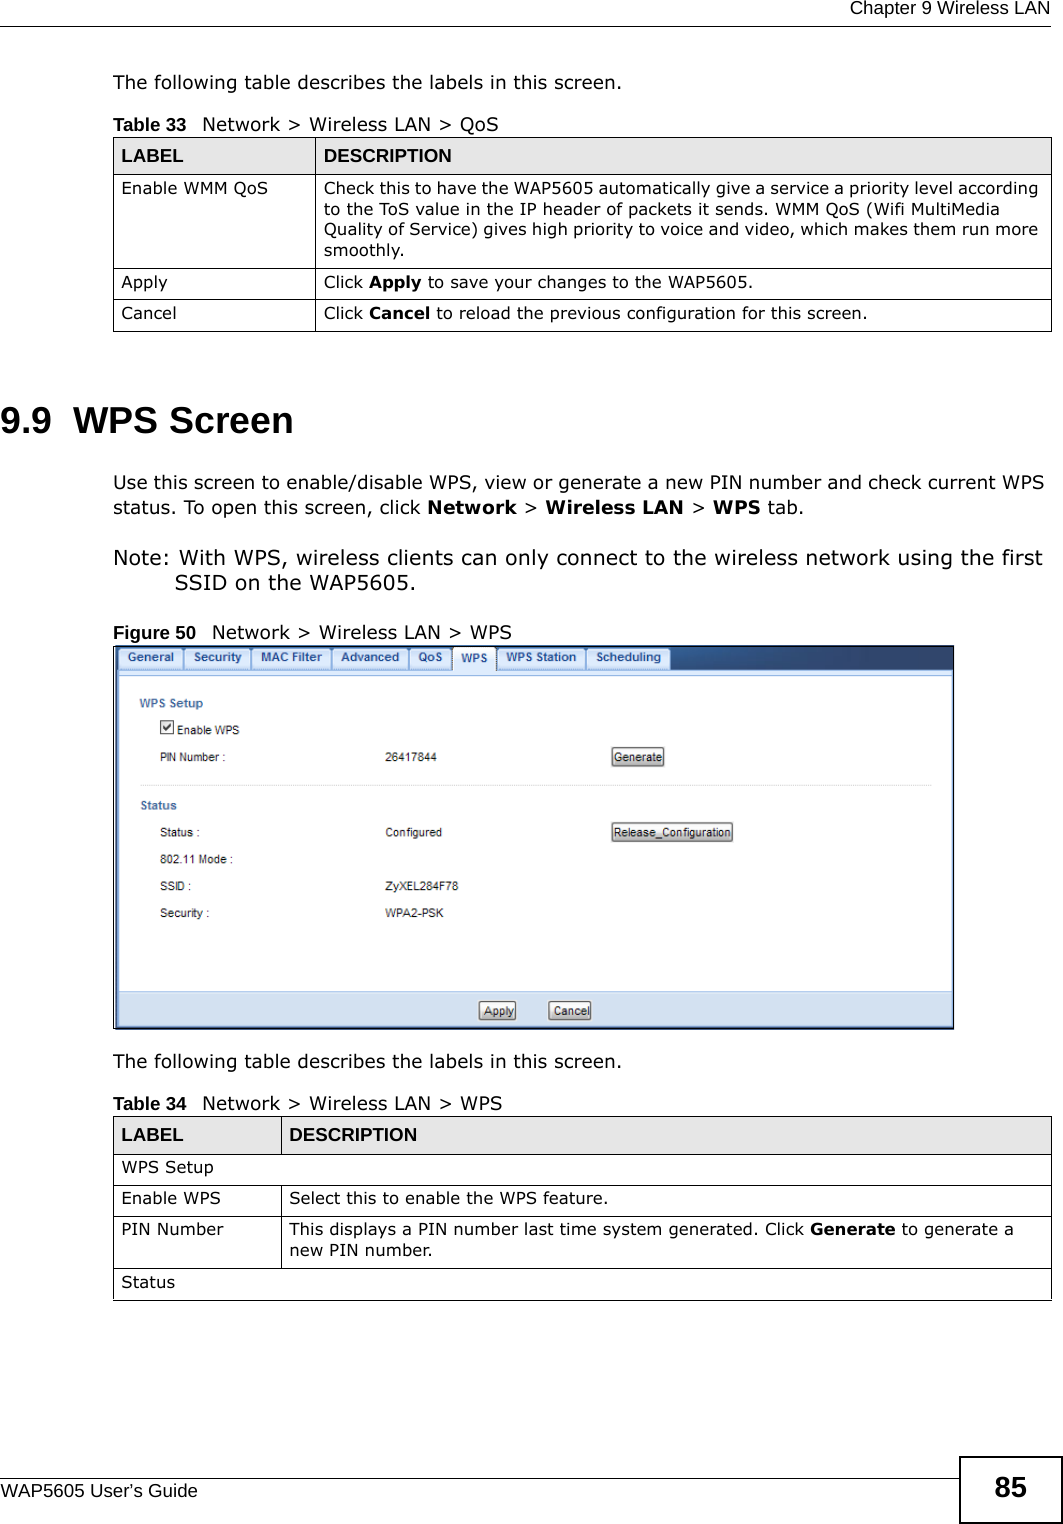  Chapter 9 Wireless LANWAP5605 User’s Guide 85The following table describes the labels in this screen. 9.9  WPS Screen  Use this screen to enable/disable WPS, view or generate a new PIN number and check current WPS status. To open this screen, click Network &gt; Wireless LAN &gt; WPS tab.Note: With WPS, wireless clients can only connect to the wireless network using the first SSID on the WAP5605.Figure 50   Network &gt; Wireless LAN &gt; WPSThe following table describes the labels in this screen.Table 33   Network &gt; Wireless LAN &gt; QoSLABEL DESCRIPTIONEnable WMM QoS Check this to have the WAP5605 automatically give a service a priority level according to the ToS value in the IP header of packets it sends. WMM QoS (Wifi MultiMedia Quality of Service) gives high priority to voice and video, which makes them run more smoothly.Apply Click Apply to save your changes to the WAP5605.Cancel Click Cancel to reload the previous configuration for this screen.Table 34   Network &gt; Wireless LAN &gt; WPSLABEL DESCRIPTIONWPS SetupEnable WPS Select this to enable the WPS feature.PIN Number This displays a PIN number last time system generated. Click Generate to generate a new PIN number.Status